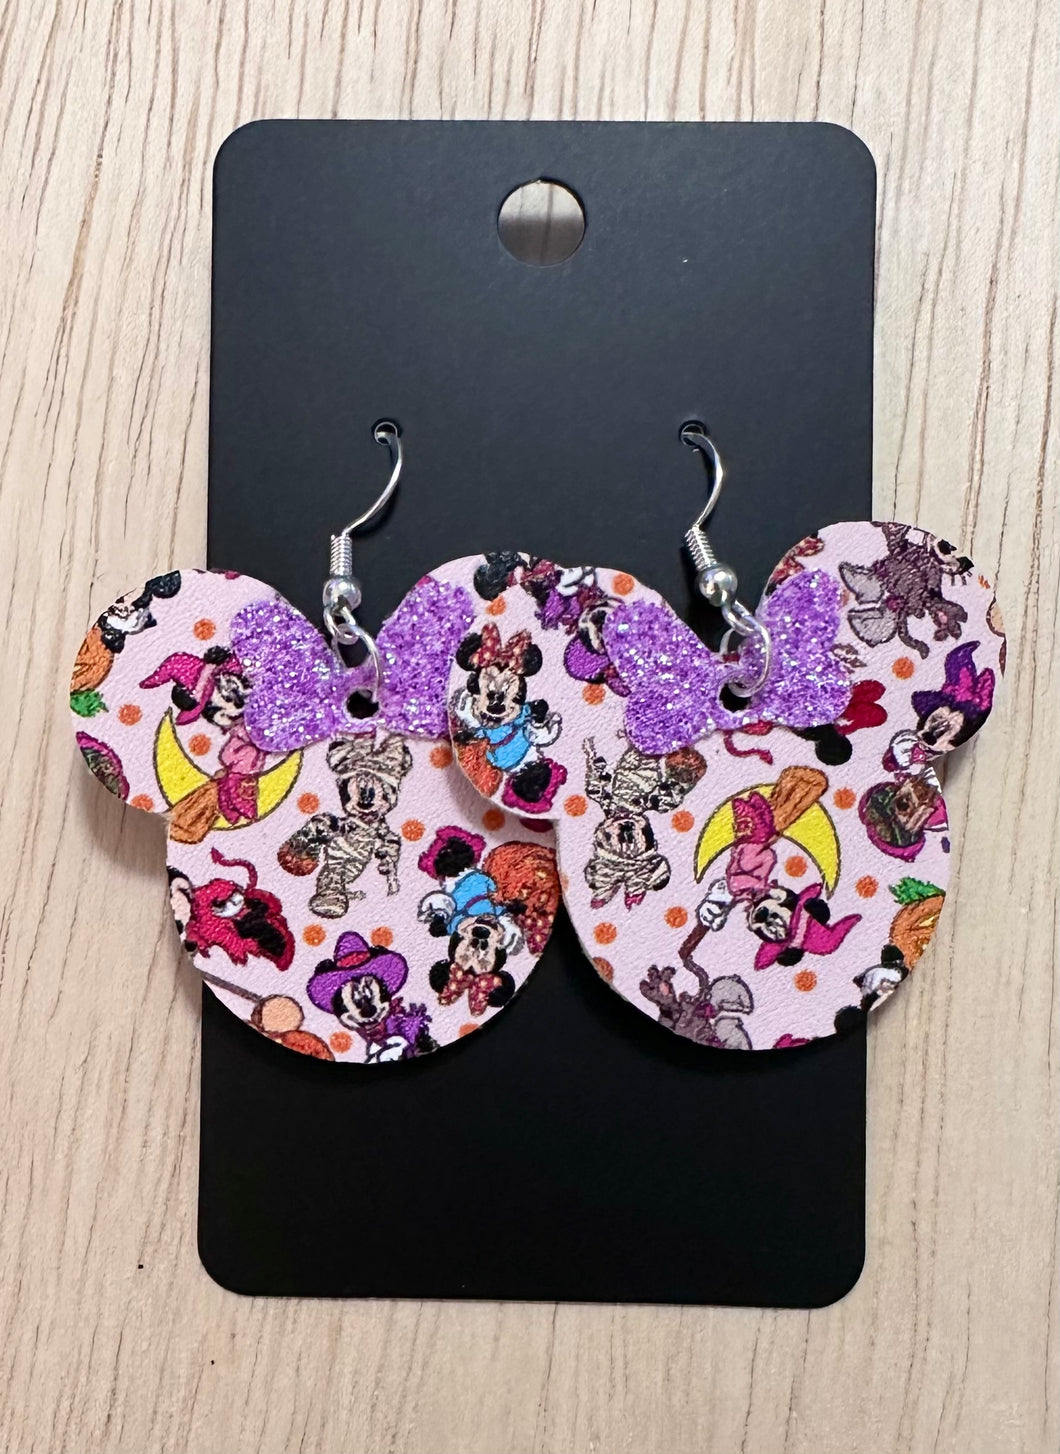 Trick or Treat Mouse Earrings